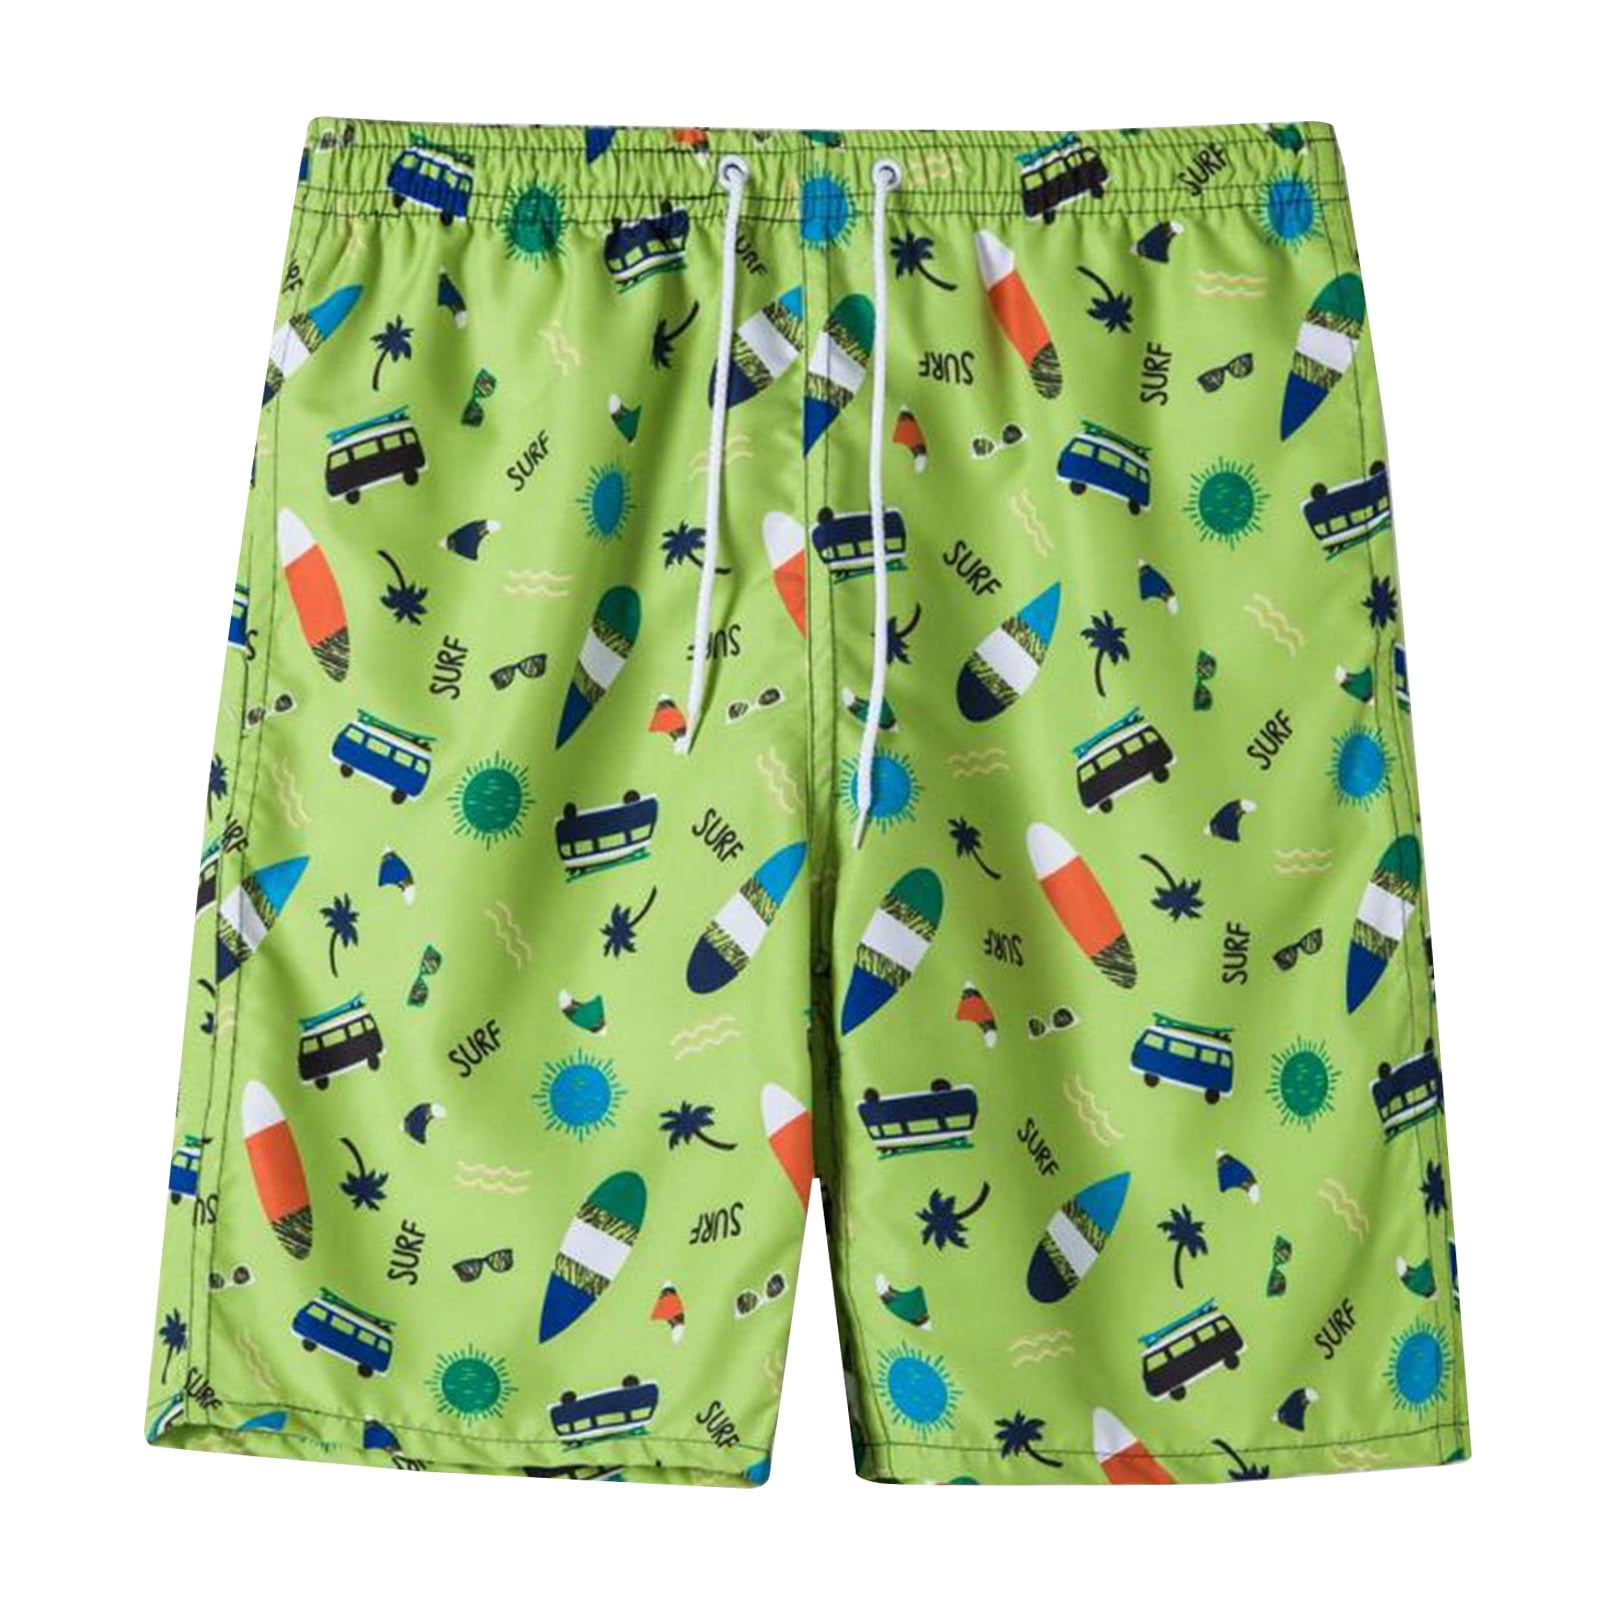 Homadles Men's Quick Dry Swim Trunks Clearance- Trendy Printed Shorts ...